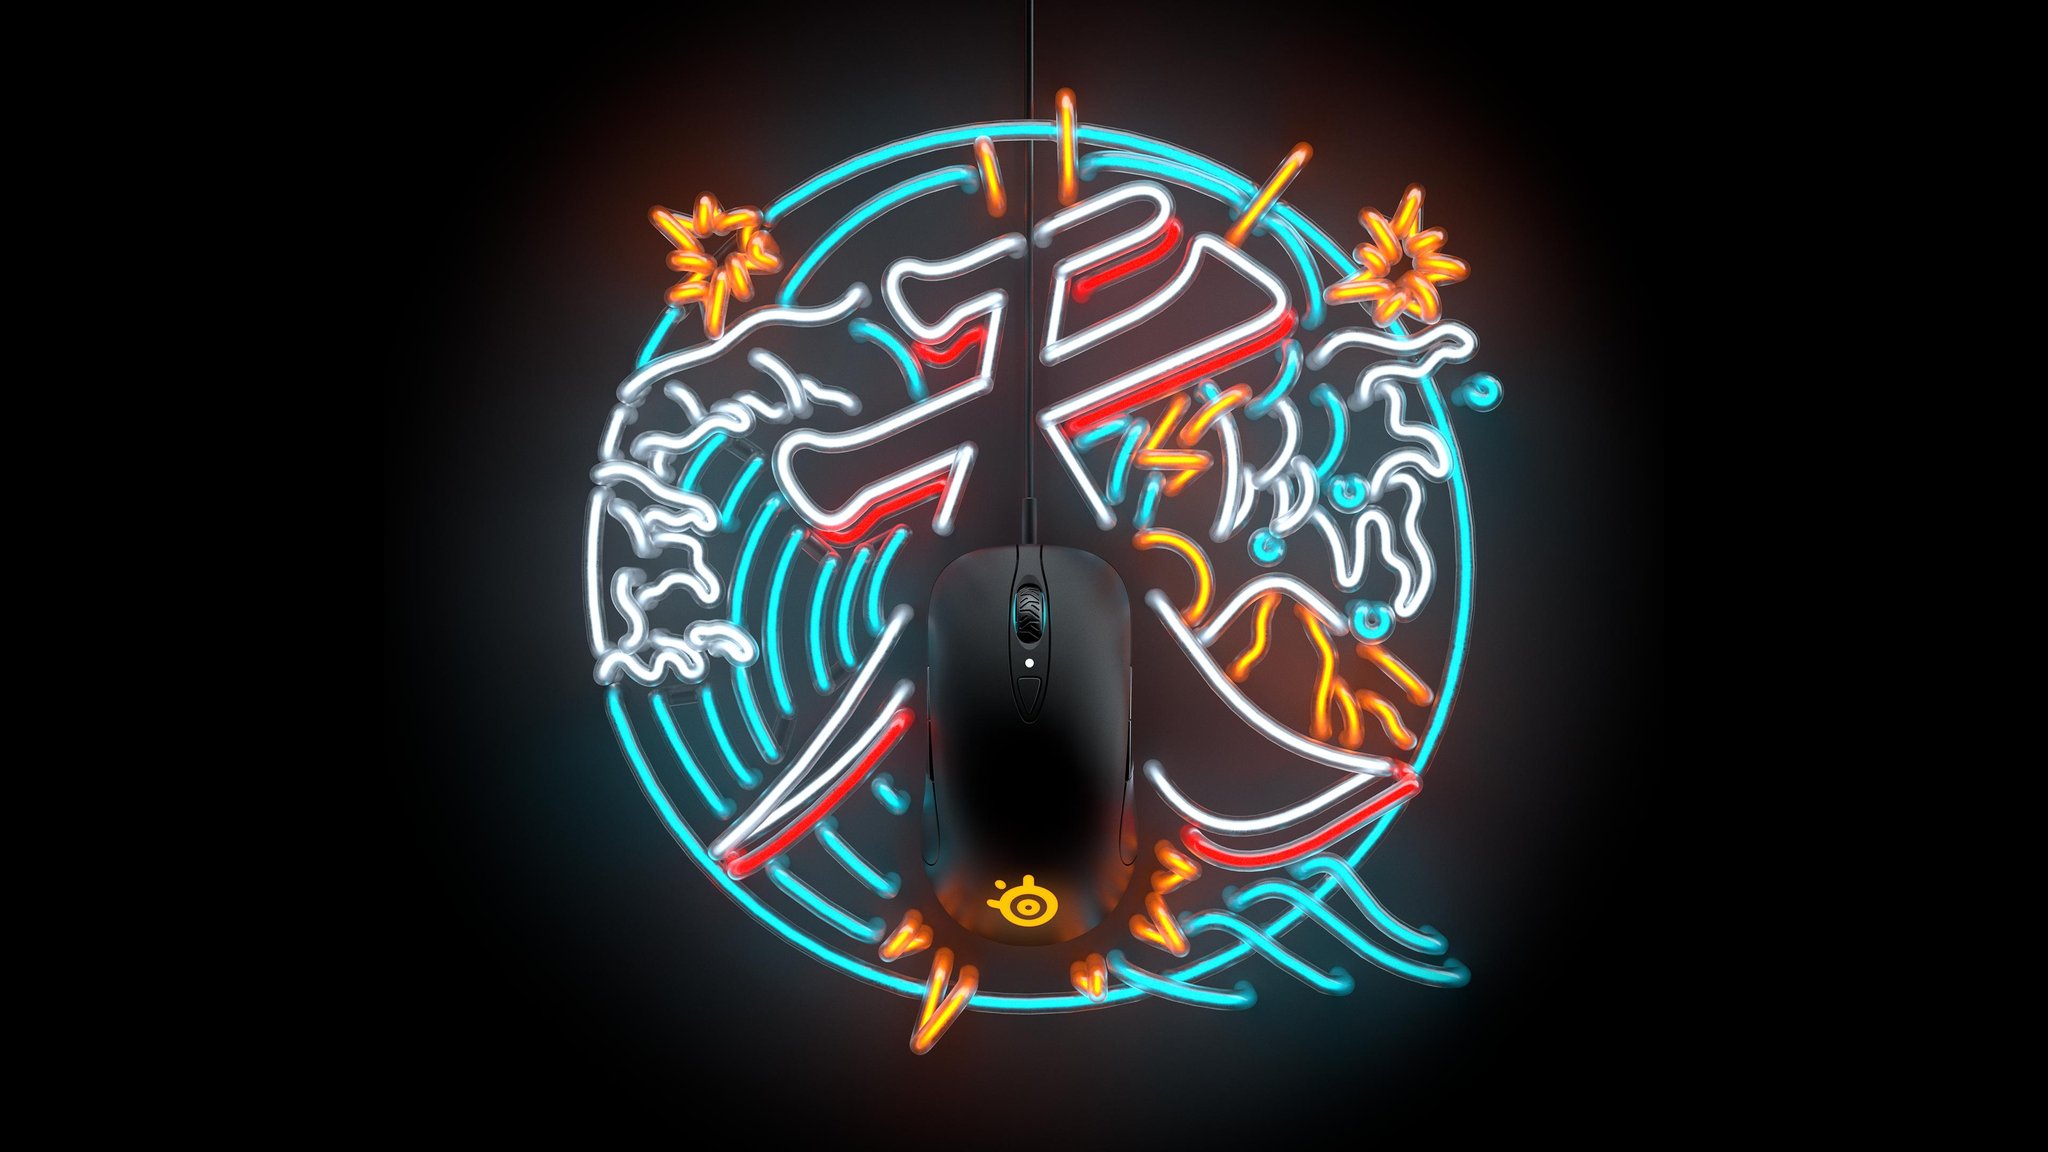 Steelseries Download Link For Any Of These Sensei Ten Wallpapers T Co Clkh2zms9c